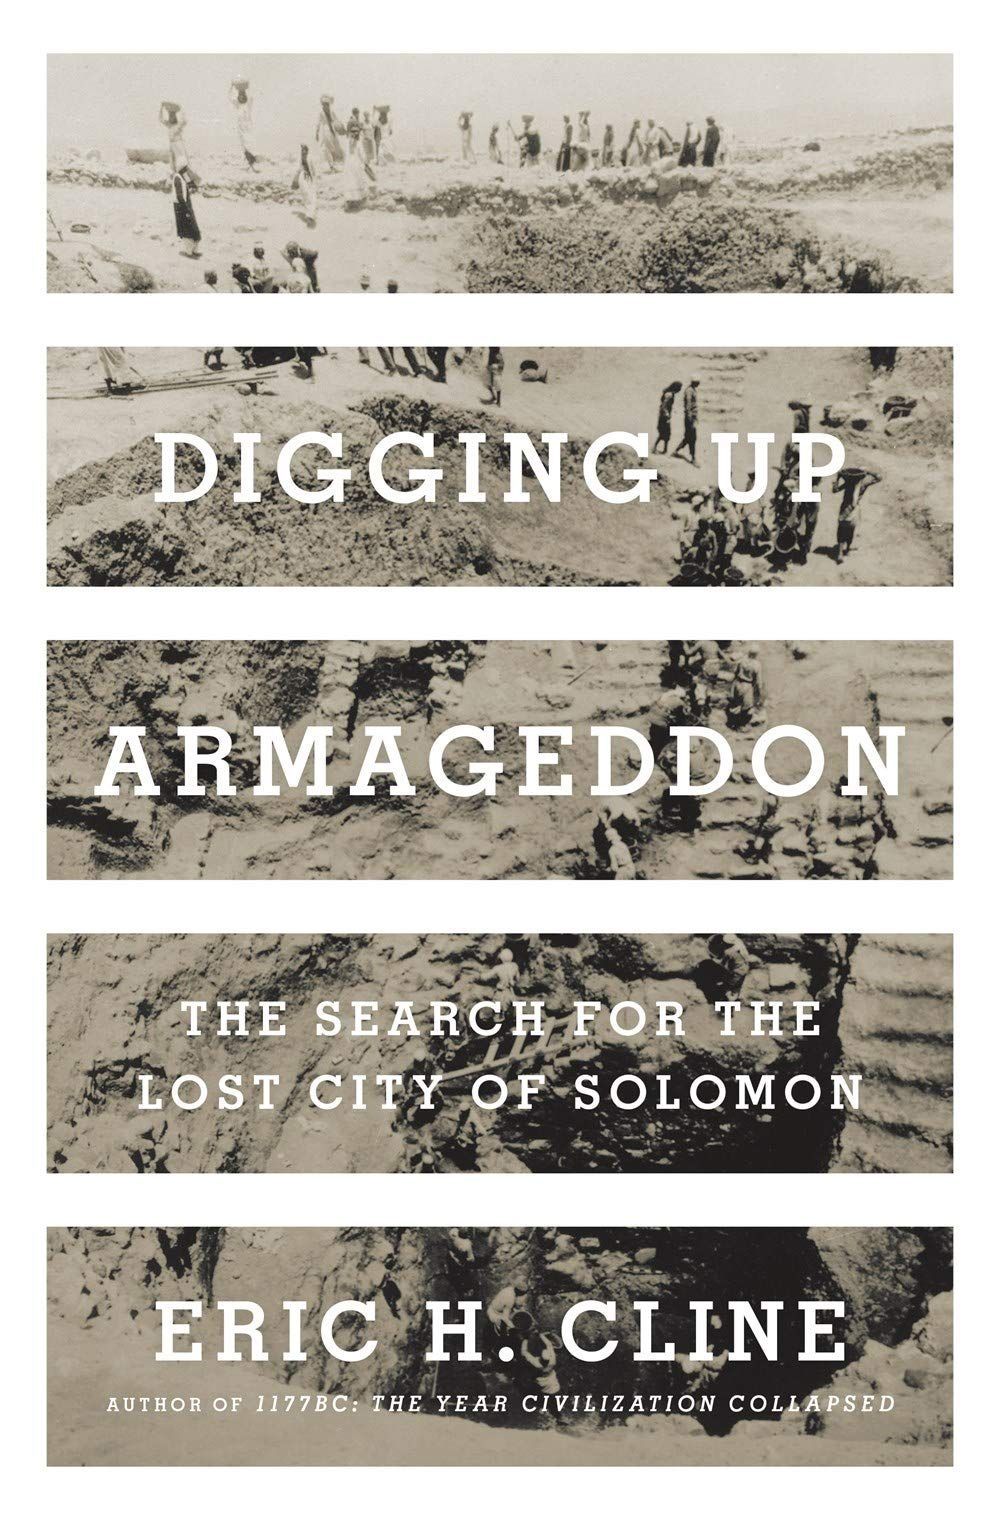 Like Flies to Honey: On Eric H. Cline’s “Digging Up Armageddon: The Search for the Lost City of Solomon”